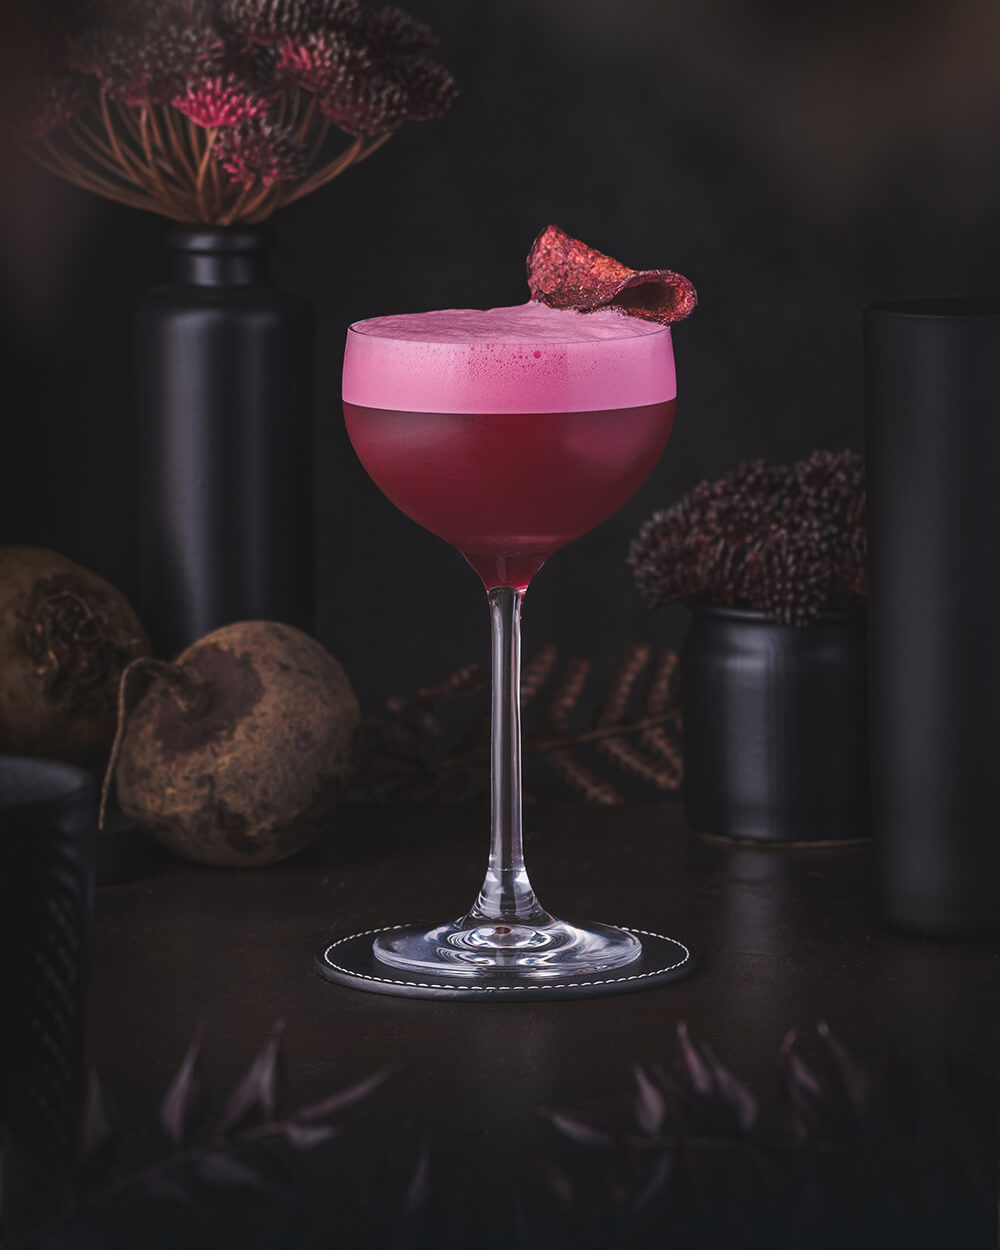 Roman Sour – Beet in a cocktail